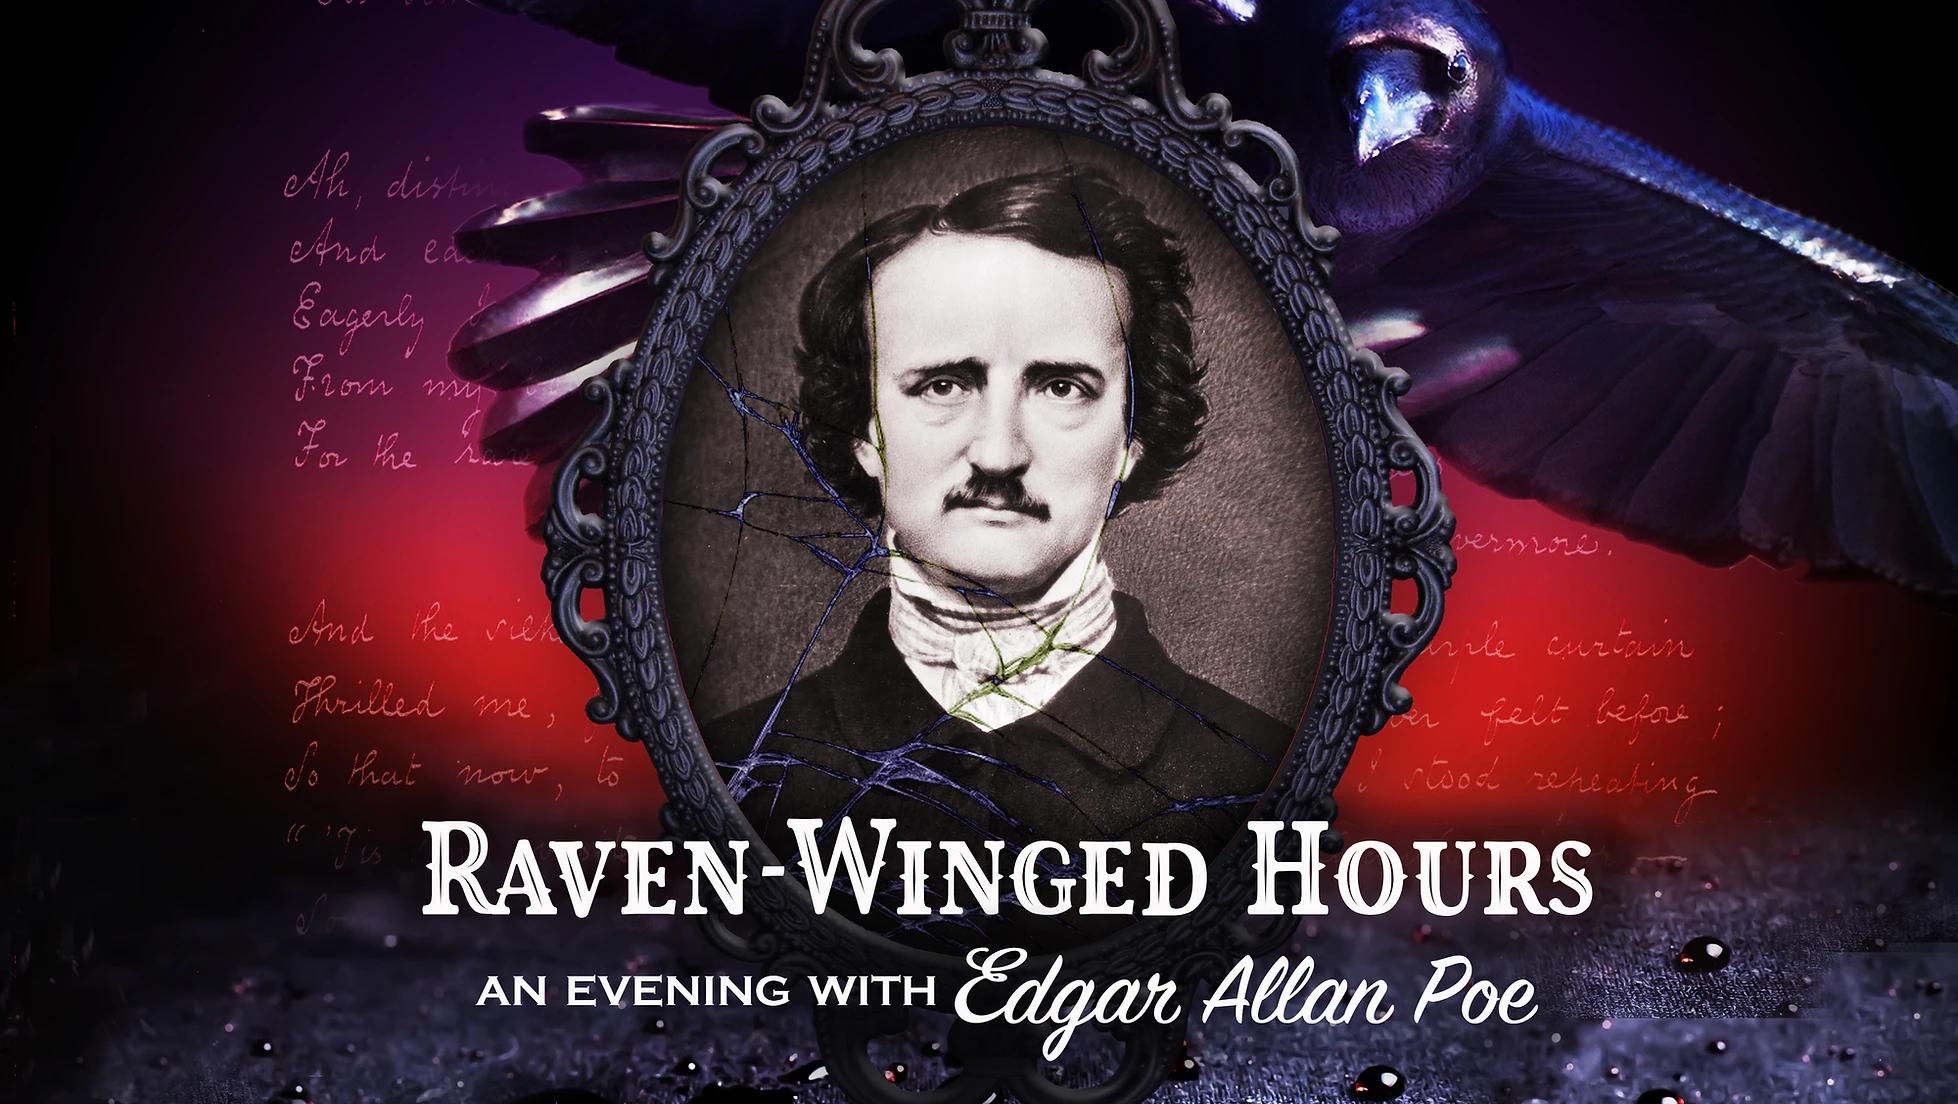 Raven-Winged Hours: An Evening with Edgar Allan Poe, directed by Chris Fontanes